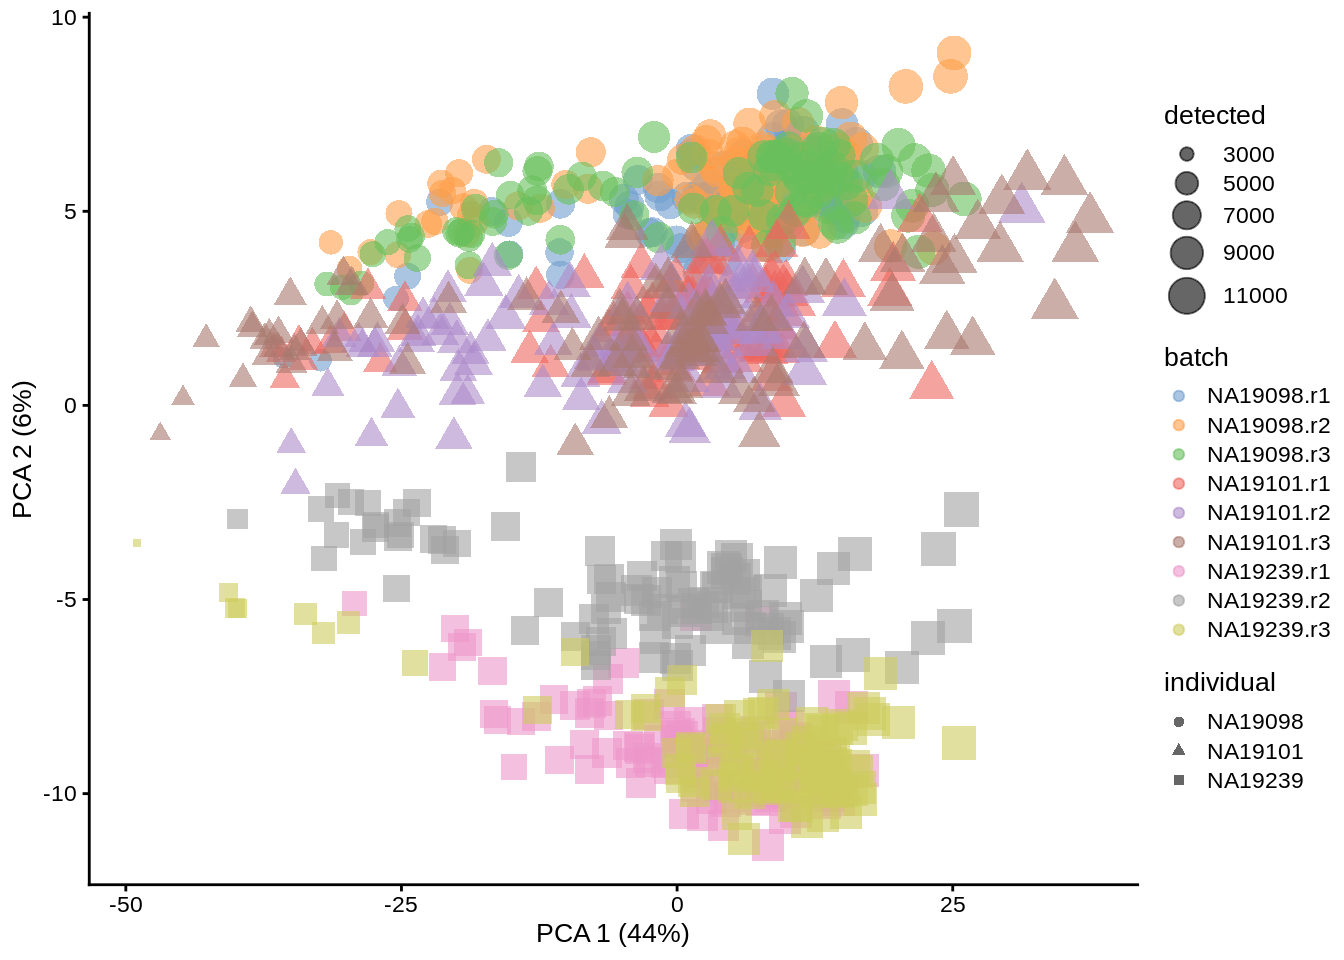 PCA plot of the tung data (non-normalized logcounts)